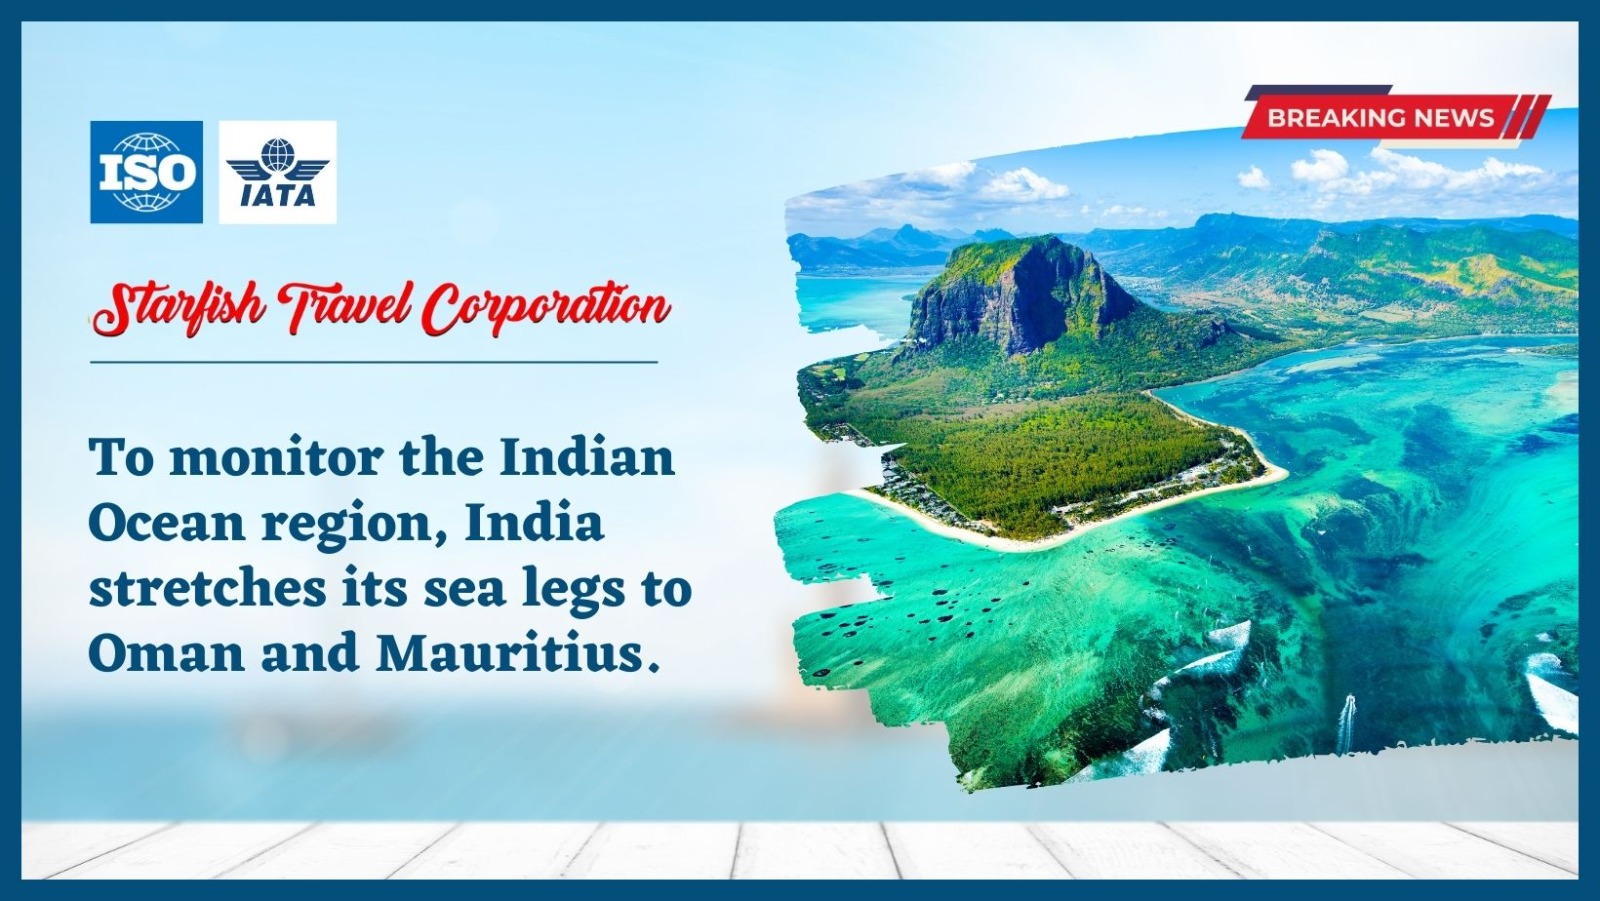 To monitor the Indian Ocean region, India stretches its sea legs to Oman and Mauritius.